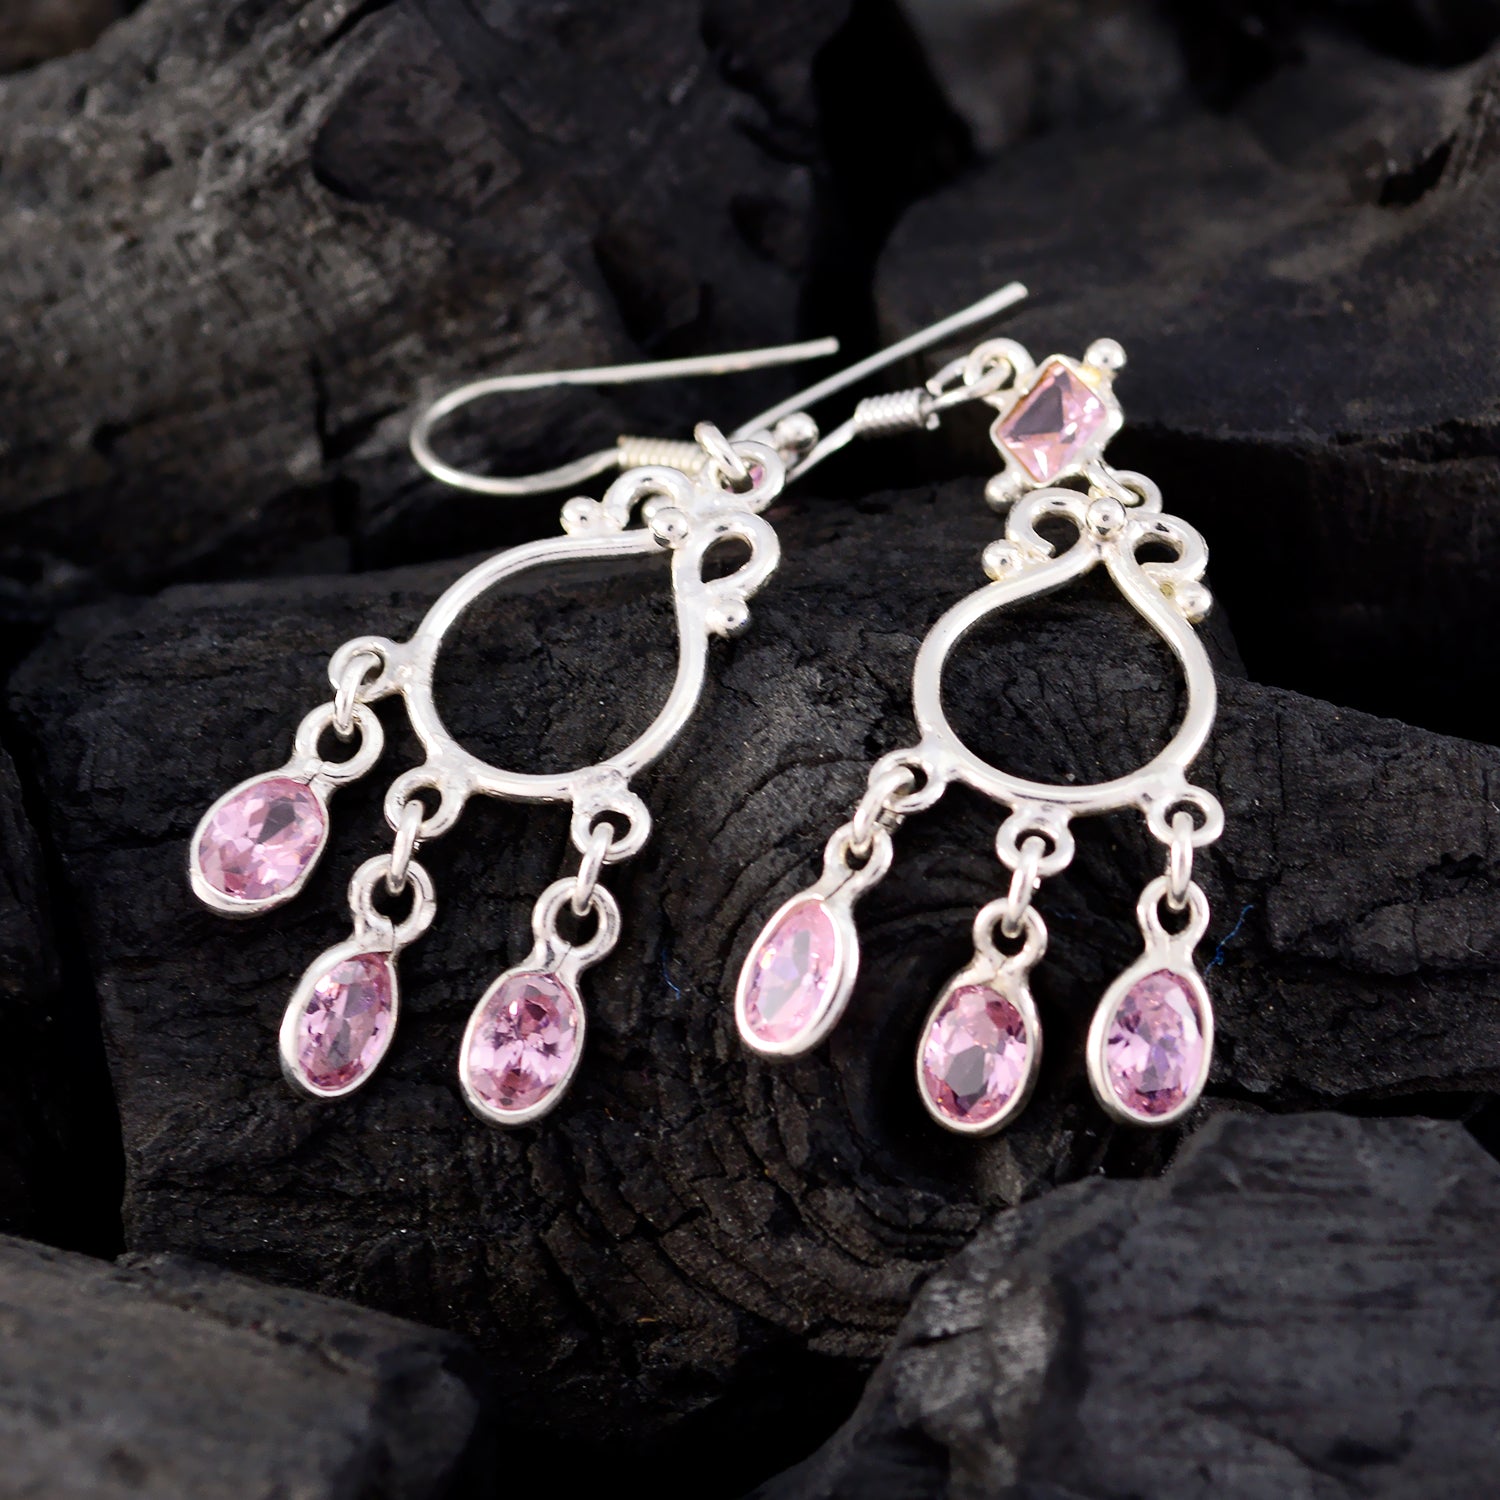 Riyo Natural Gemstone multi shape Faceted Pink Pink CZ Silver Earrings gift for friendship day